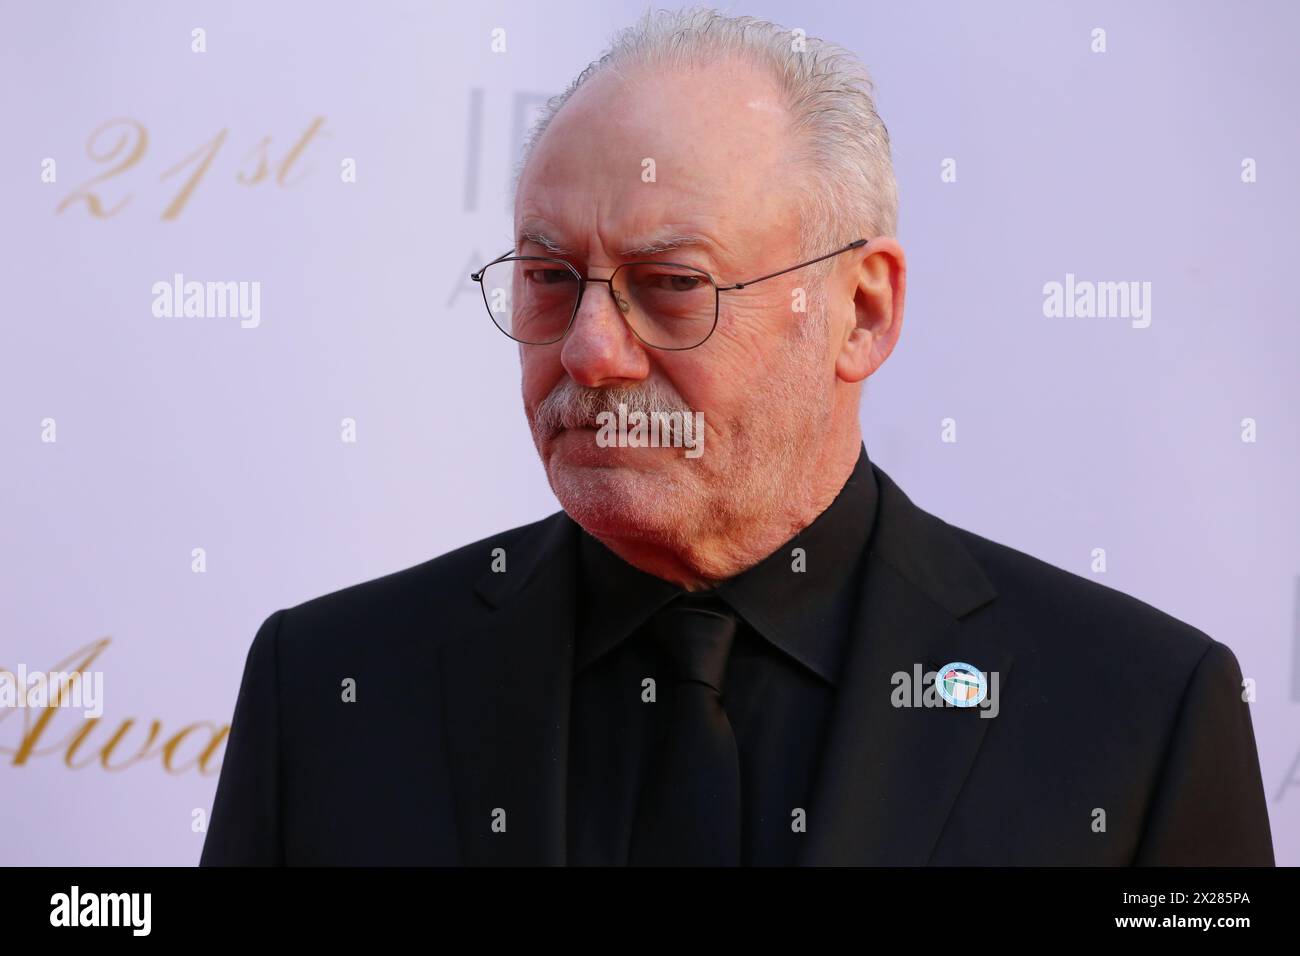 Dublin, Ireland. 20th April 2024.  Actor Liam Cunningham arriving on the red carpet at the Irish Film and Television Awards (IFTA), Dublin Royal Convention Centre. Credit: Doreen Kennedy/Alamy Live News. Stock Photo